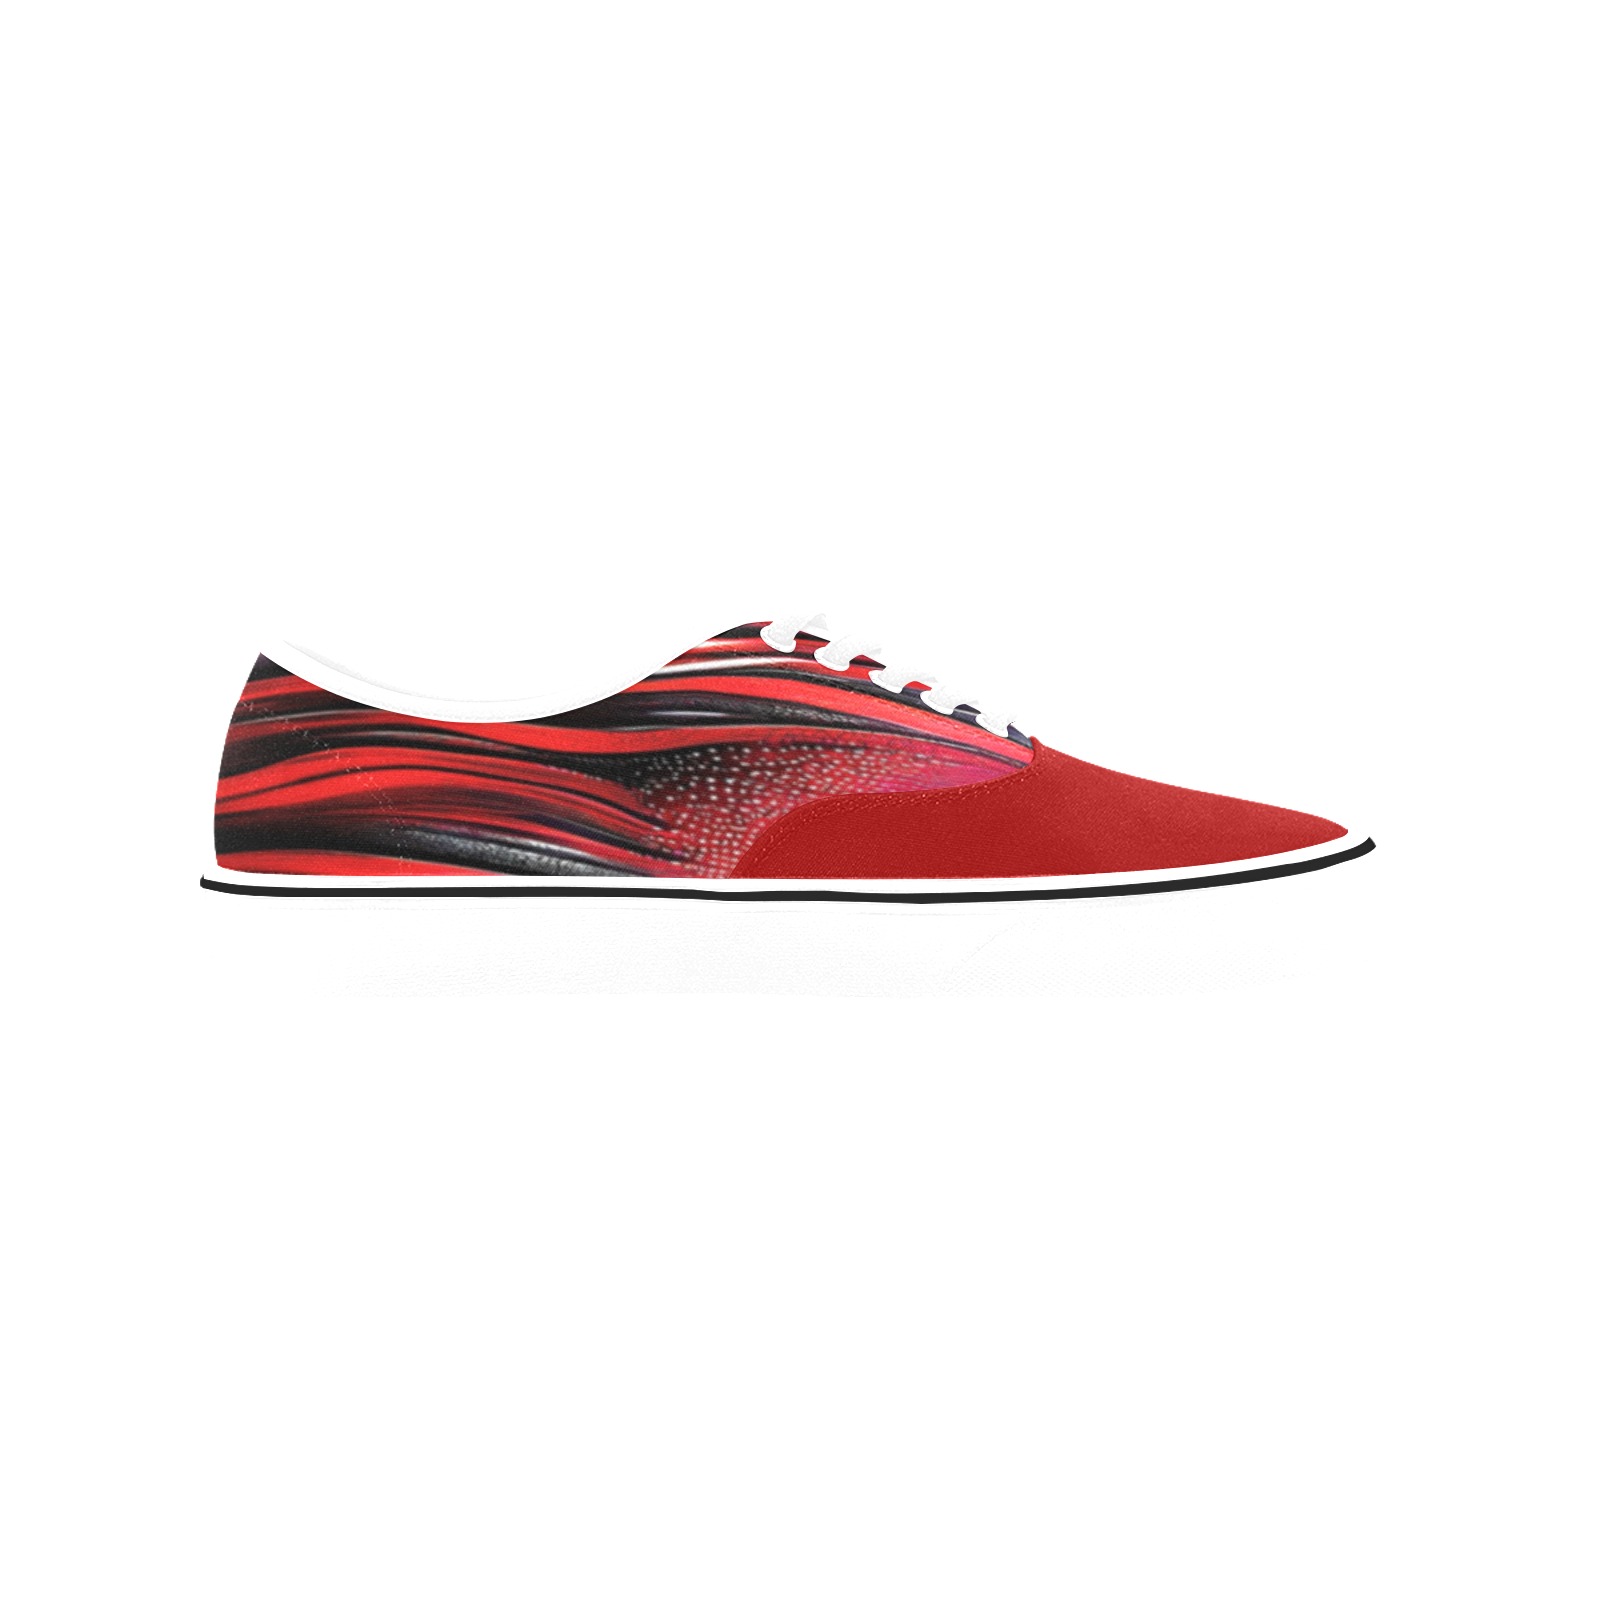 red and black curved pattern Classic Women's Canvas Low Top Shoes (Model E001-4)